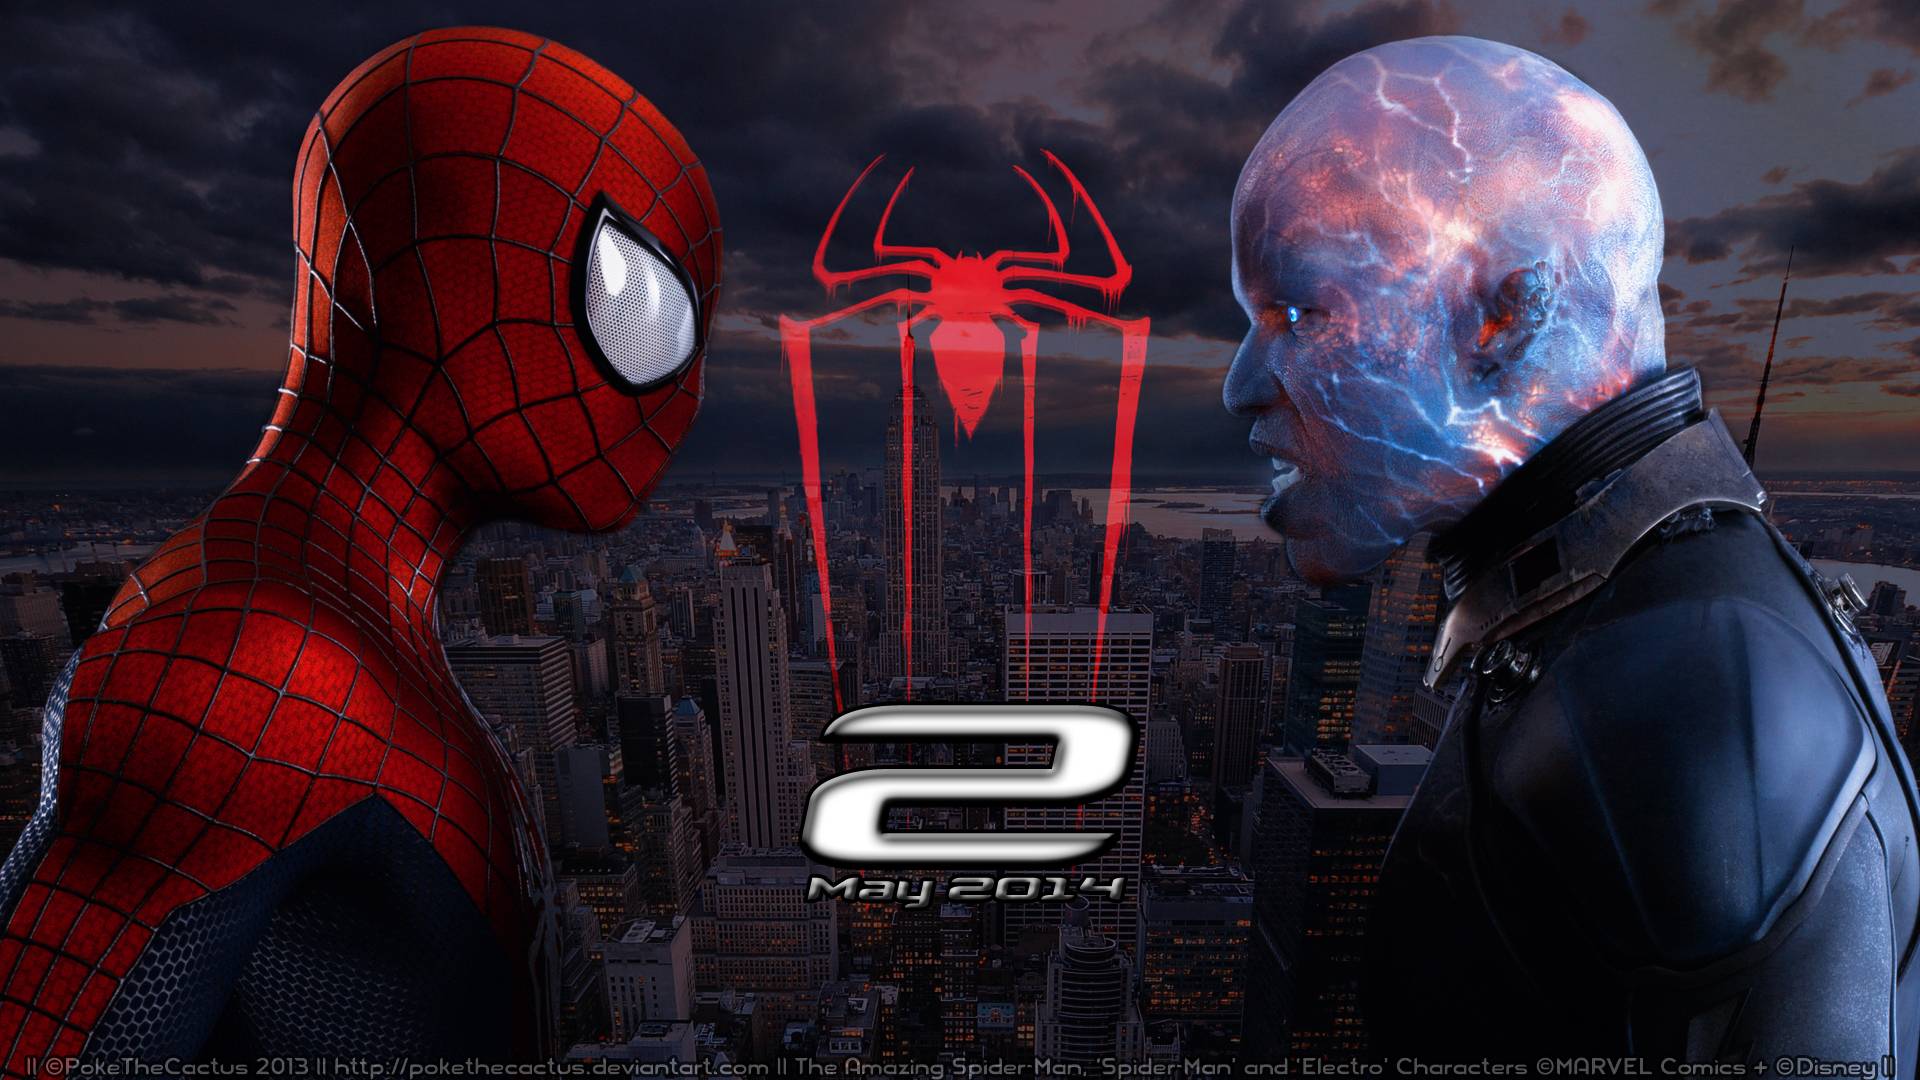 The Amazing Spider Man 2 Wallpaper 3738 Hd Wallpapers ibwall.com